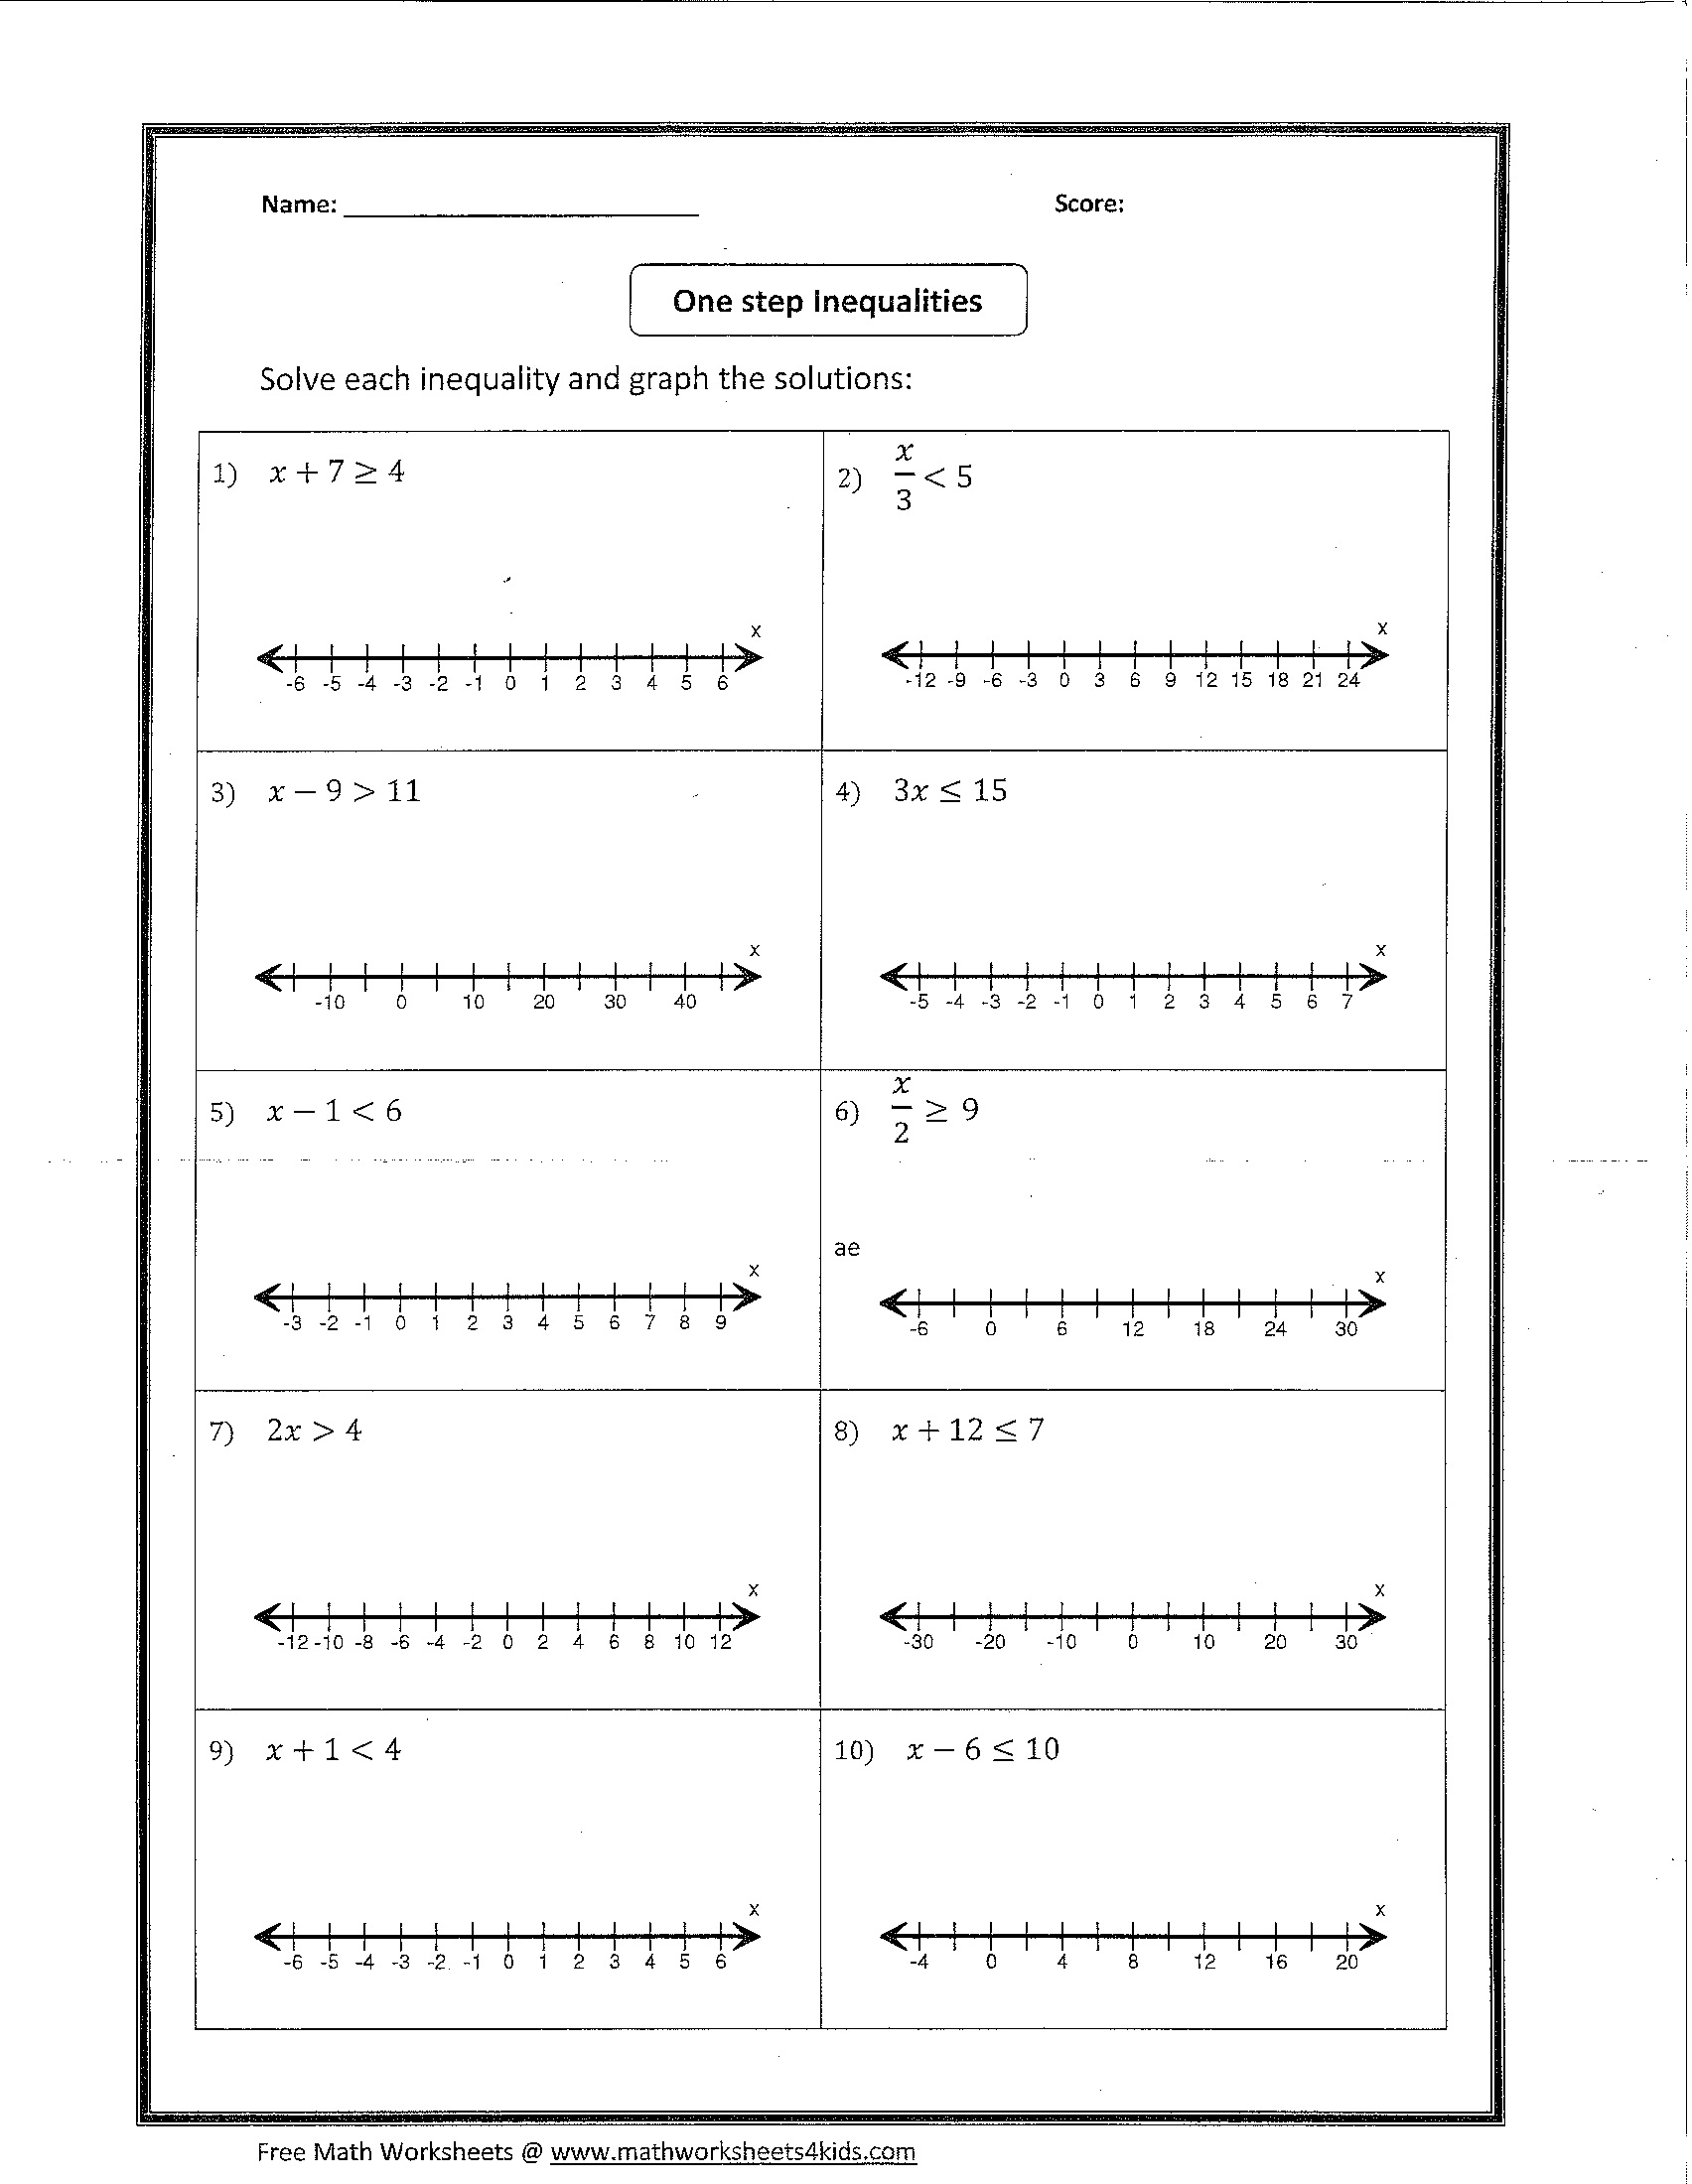 9-graphing-inequalities-on-a-number-line-worksheets-worksheeto